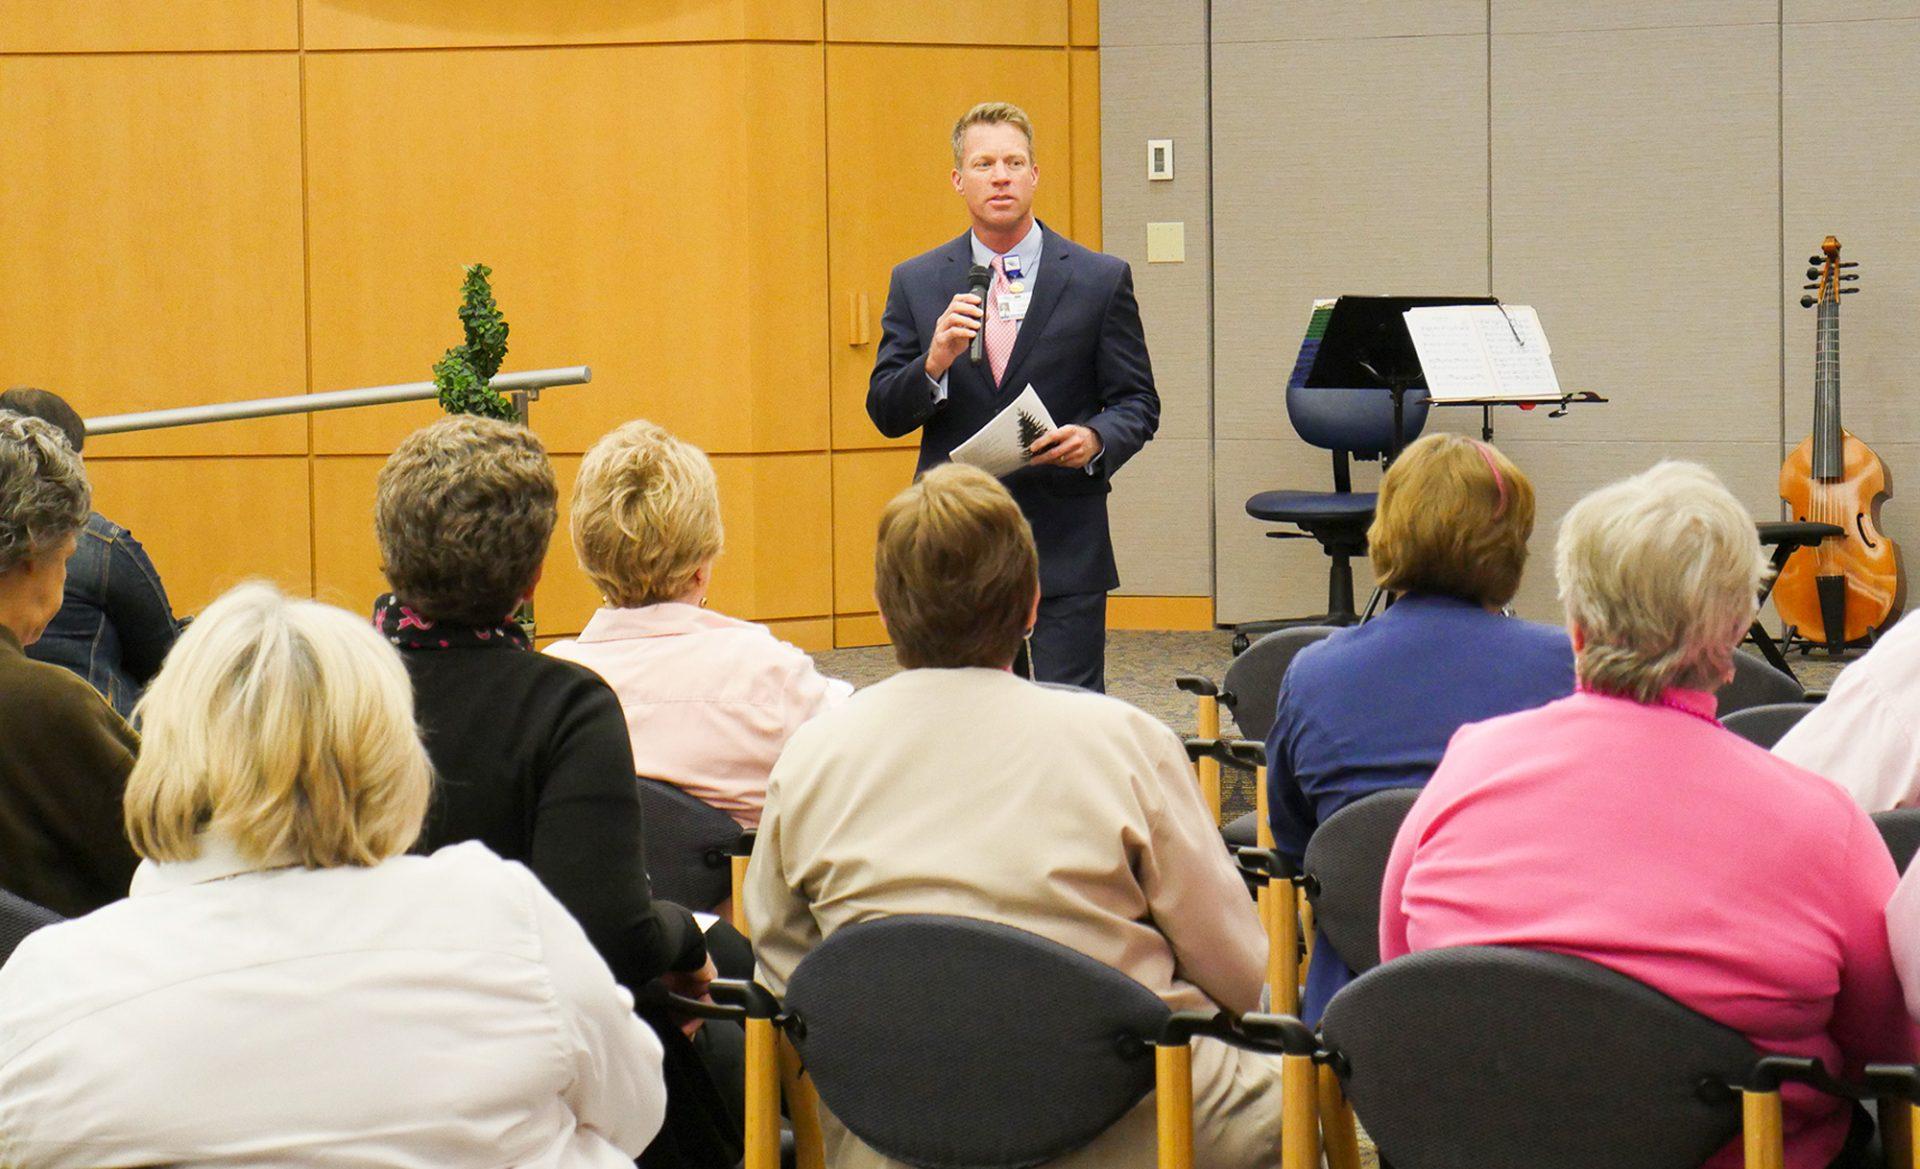 President & CEO of Appalachian Regional Healthcare System, Chuck Mantooth,  speaking at Pink Day. The event was held on Friday, Oct. 13 at Watauga Medical Center.